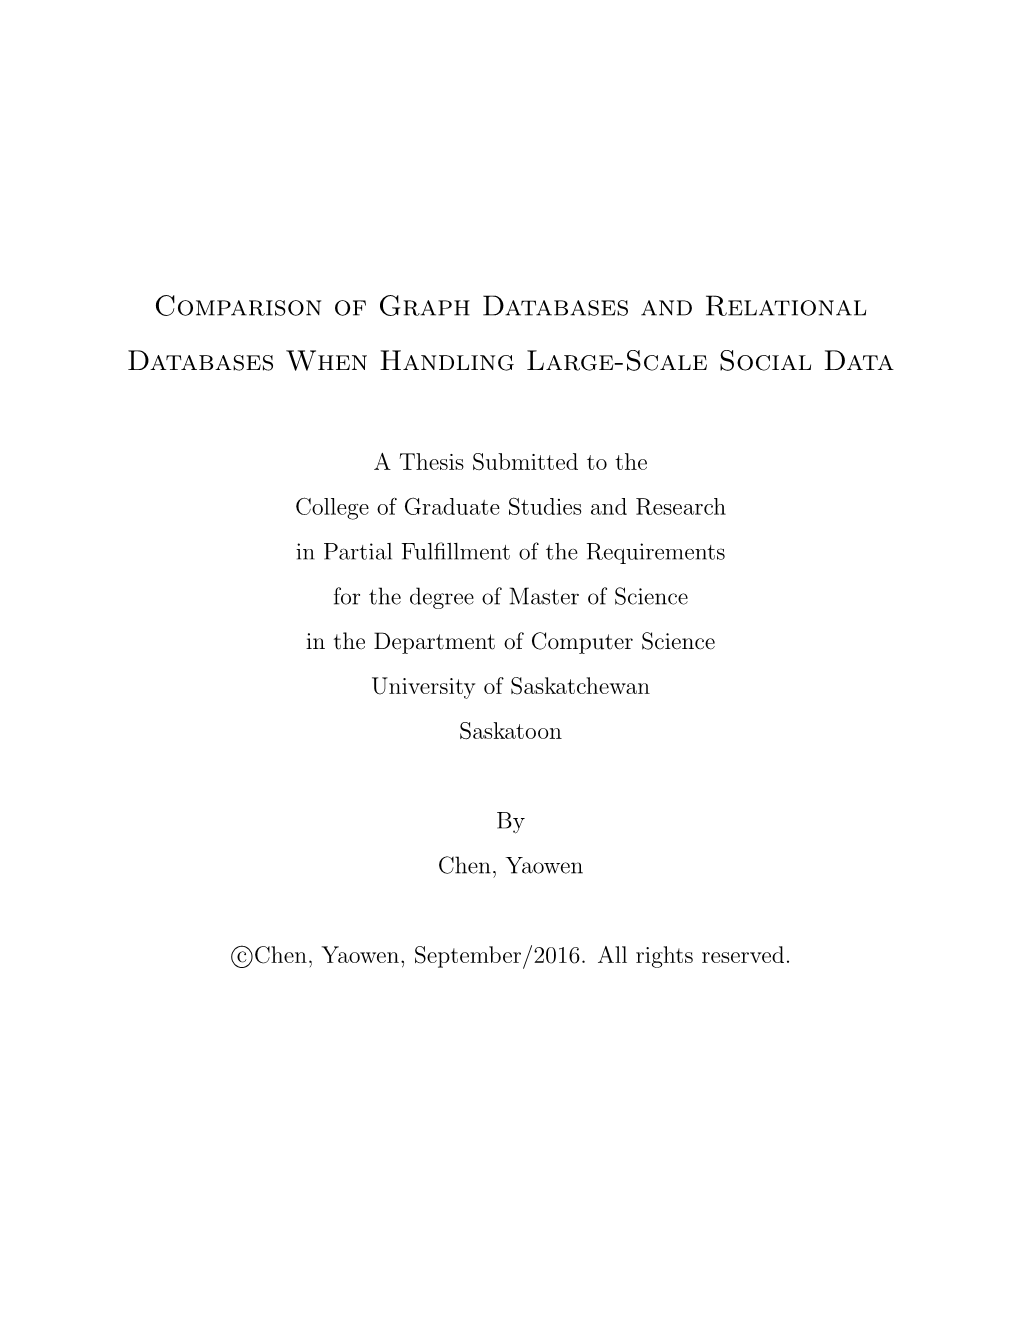 Comparison of Graph Databases and Relational Databases When Handling Large-Scale Social Data